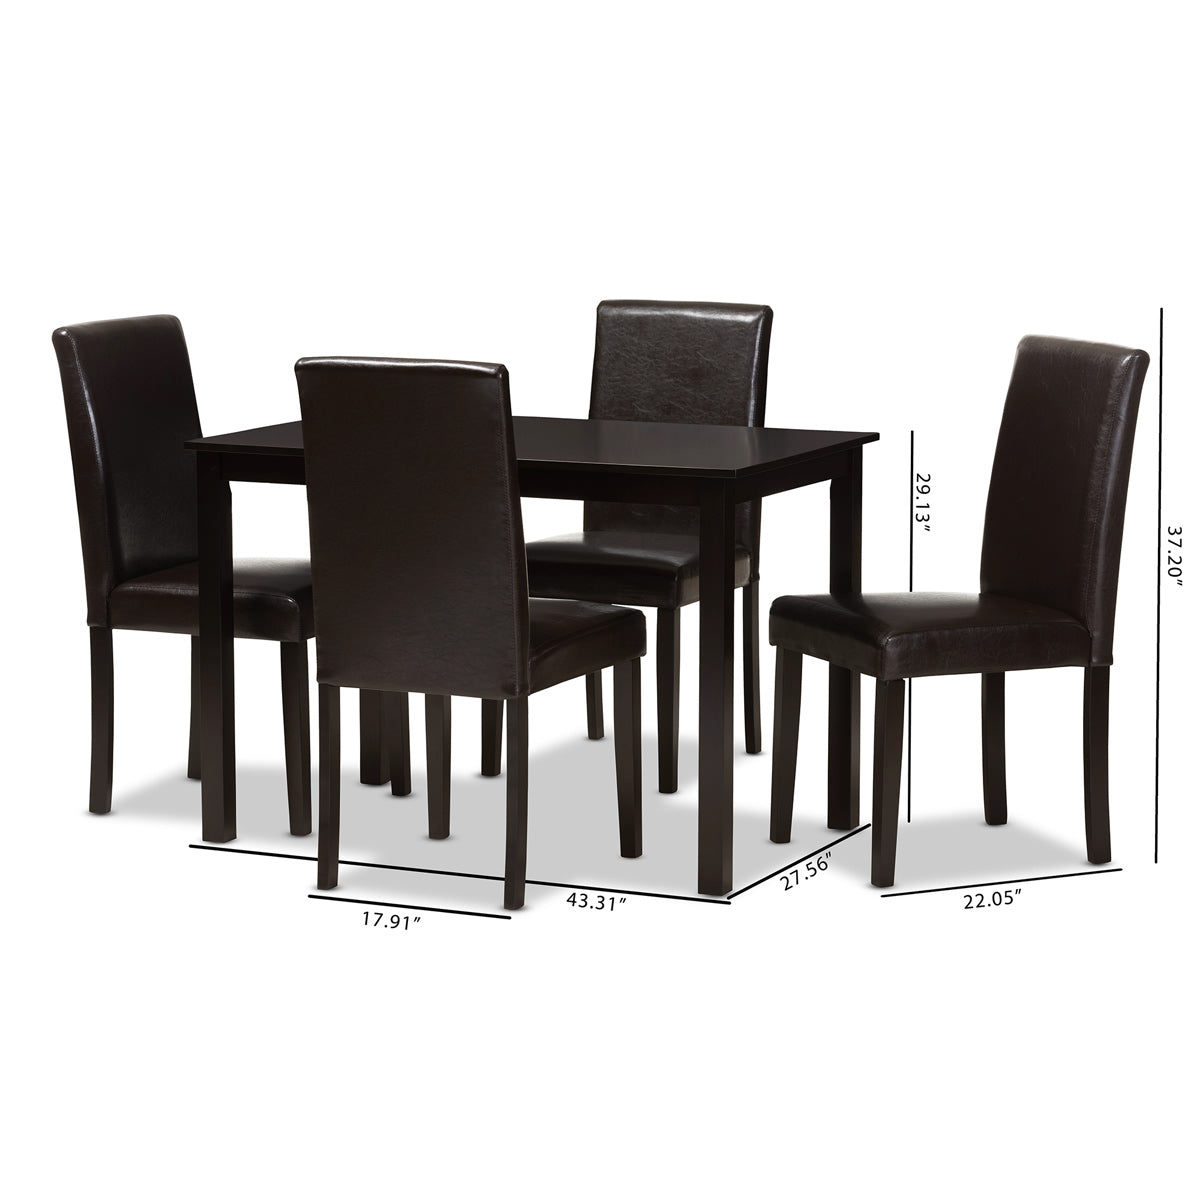 Baxton Studio Mia Modern and Contemporary Dark Brown Faux Leather Upholstered 5-Piece Dining Set Baxton Studio-0-Minimal And Modern - 7